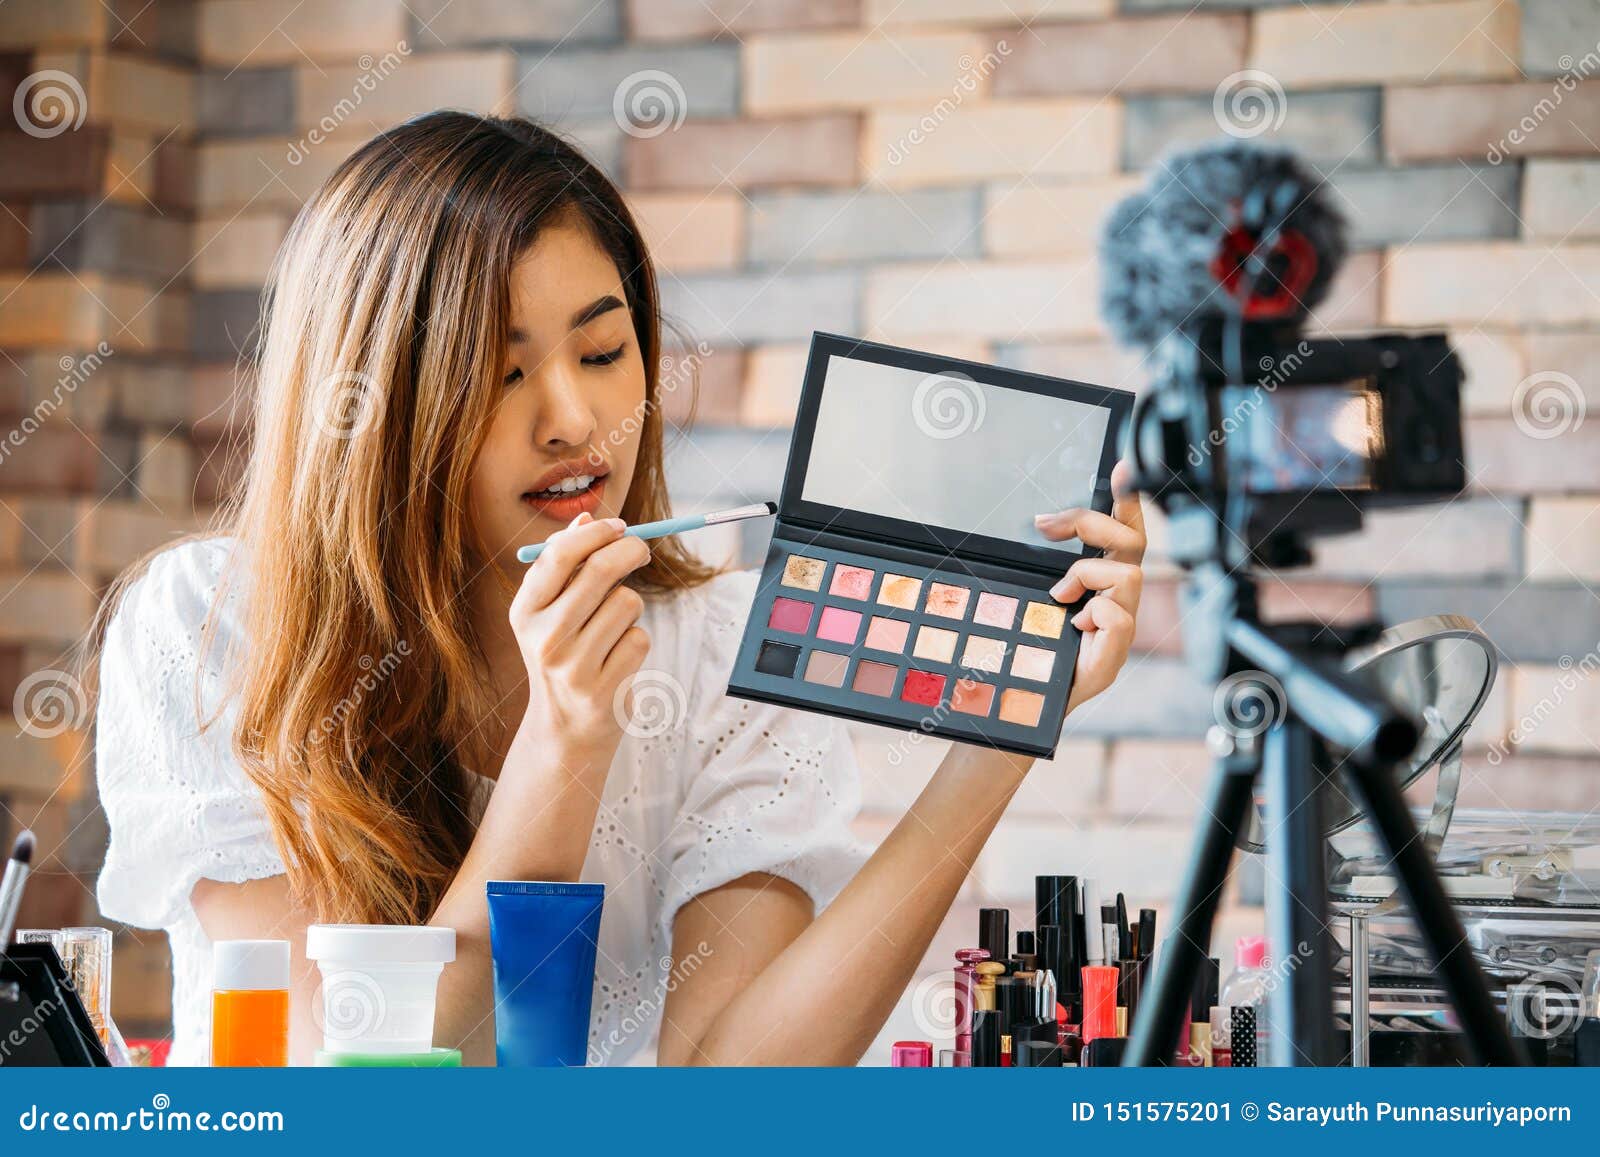 pretty asian woman recording makeup tutorial video about cosmetics with mobile phone on tripod